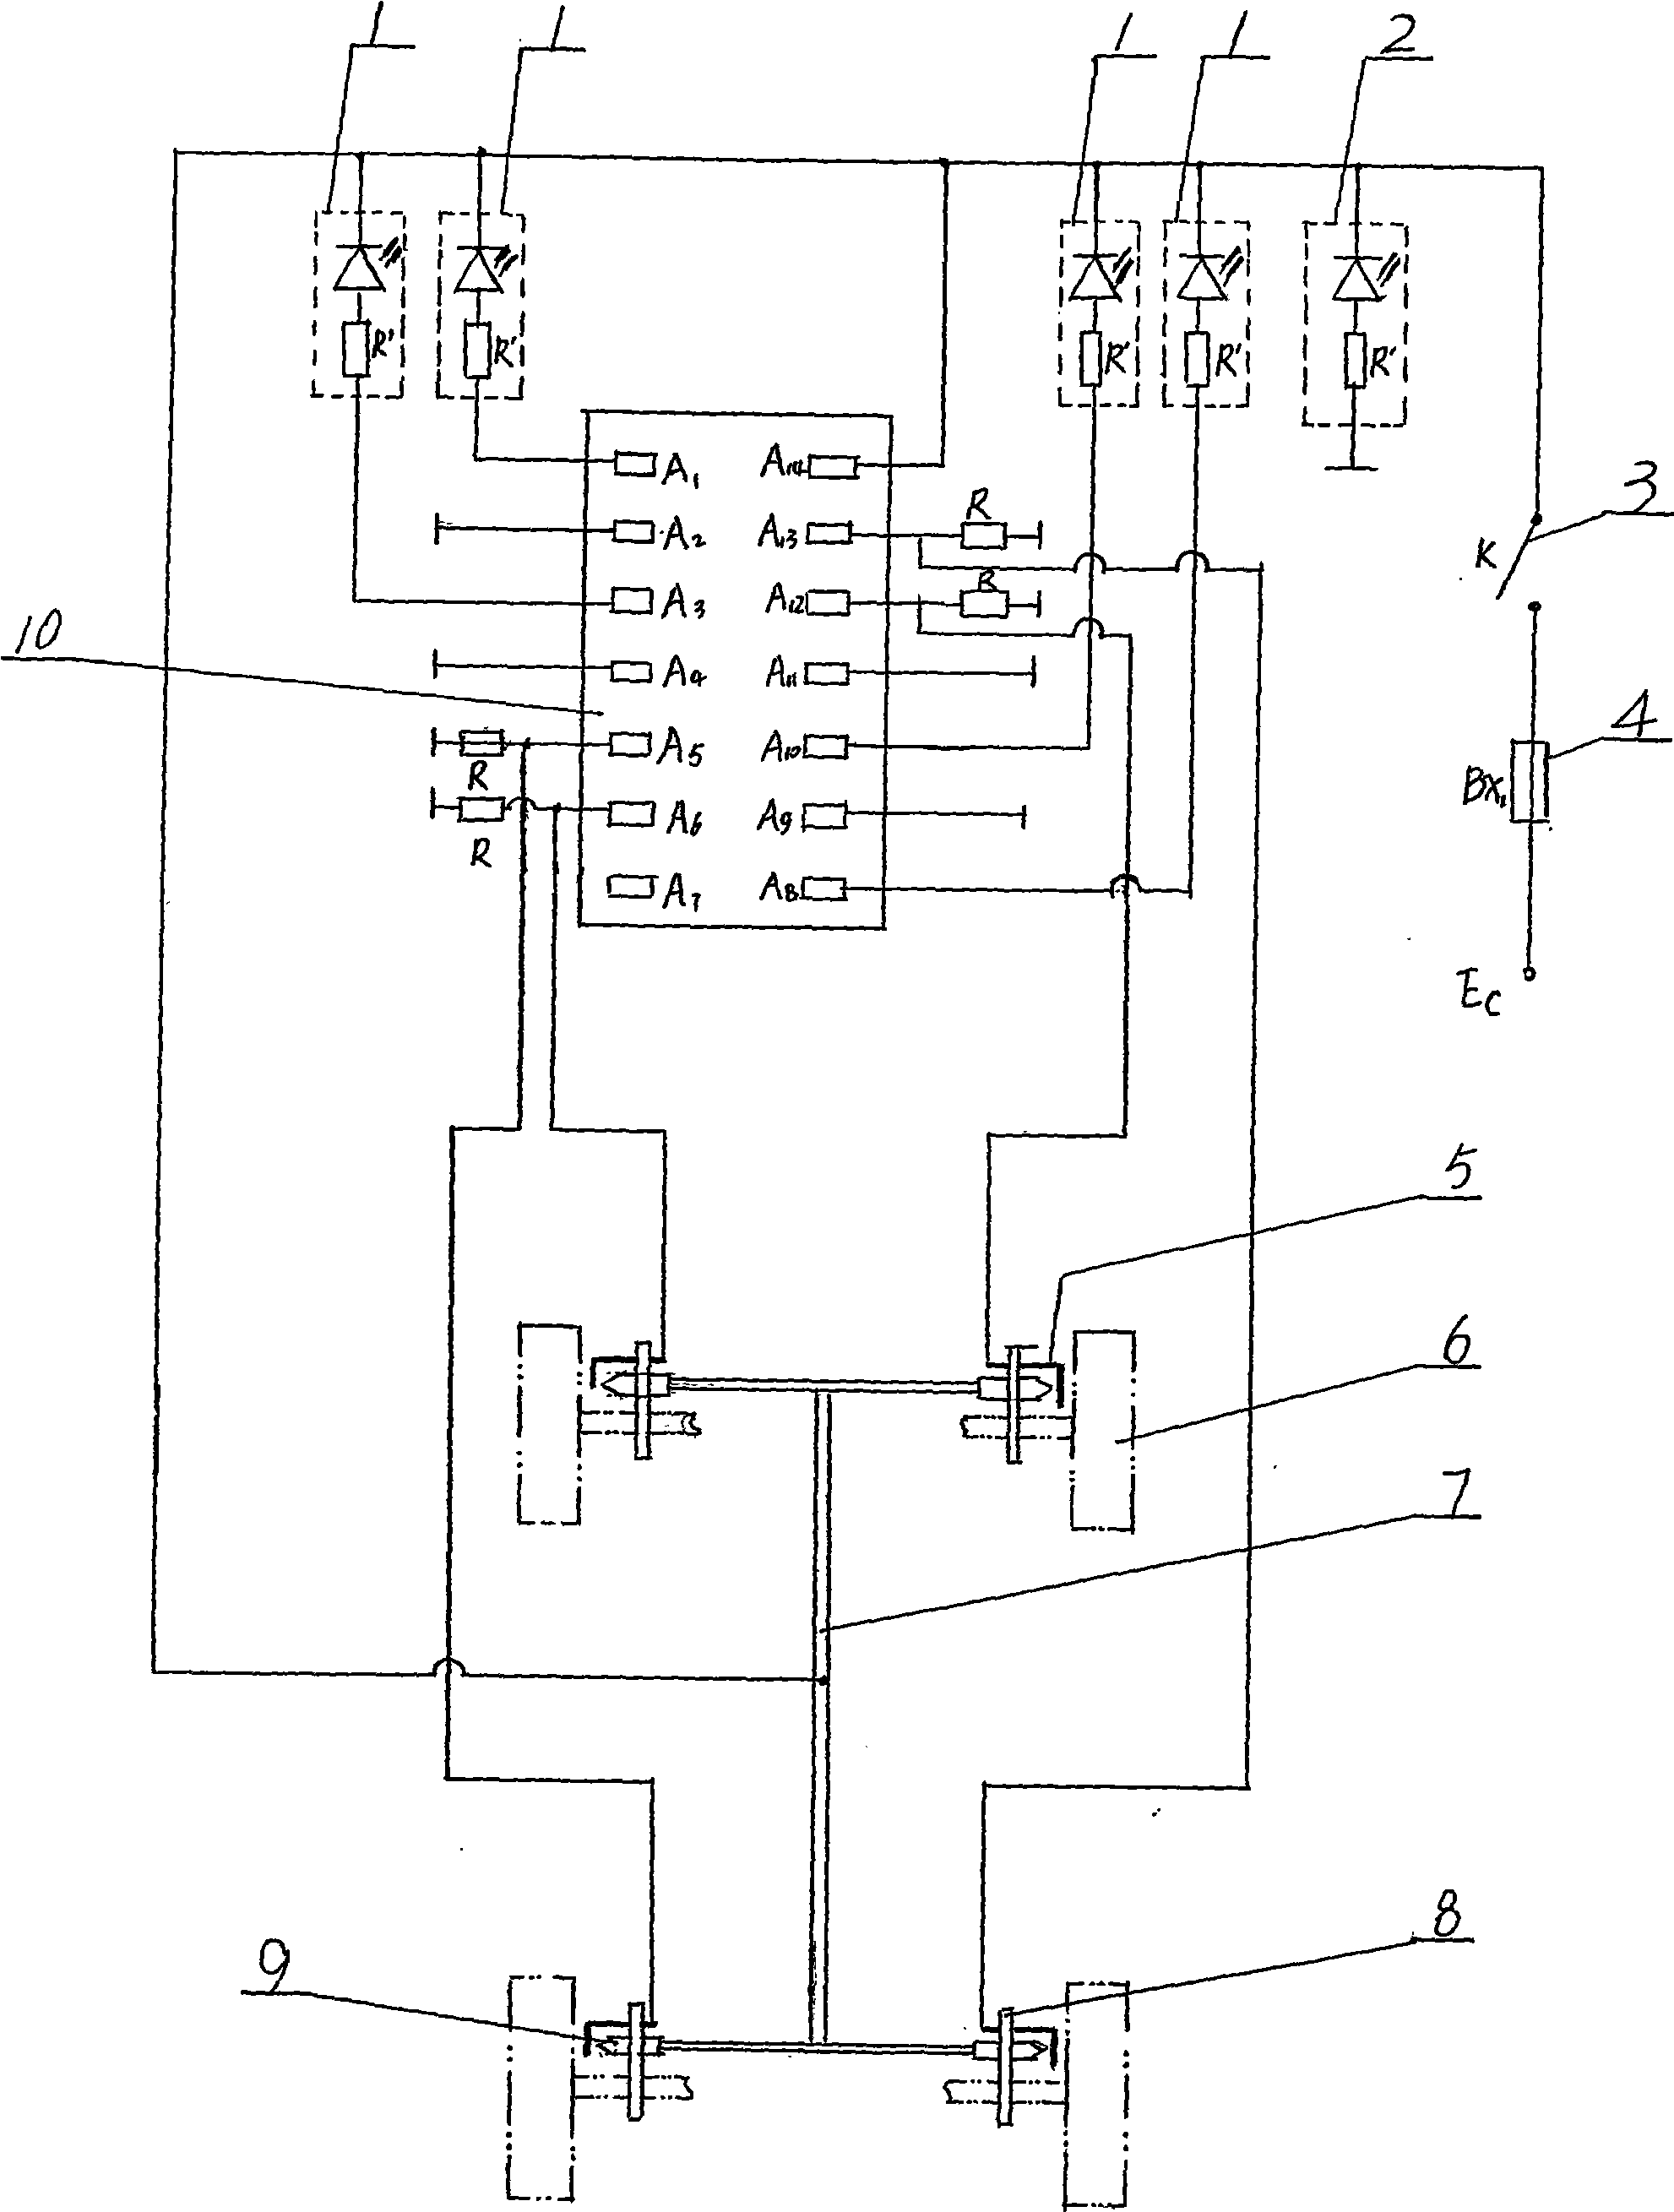 Brake cooling water monitoring device for automobile